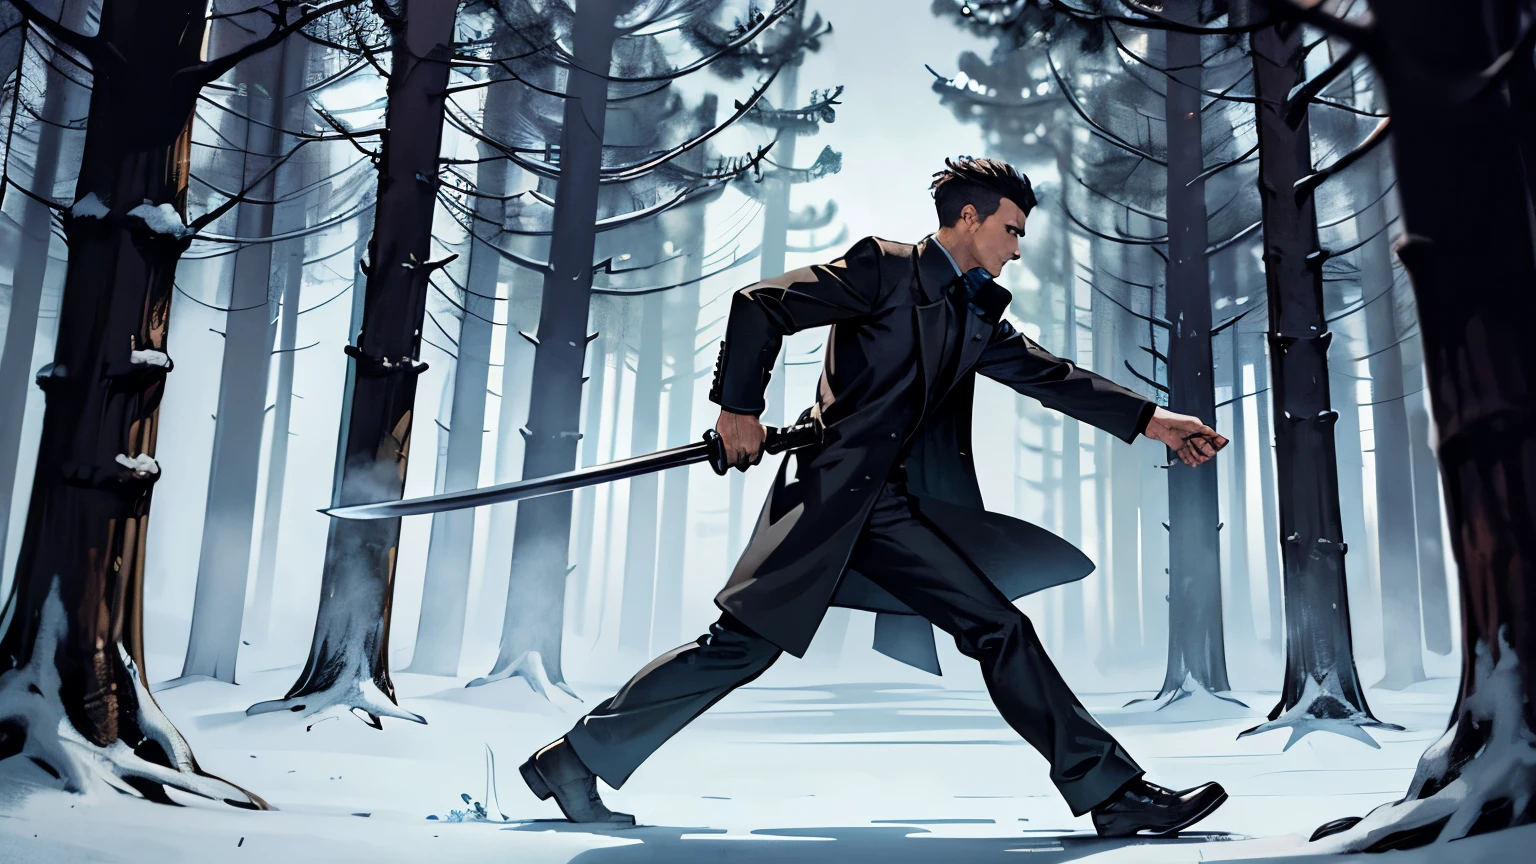 a man in a black overcoat holding a sword, running, in a dense forest, side view